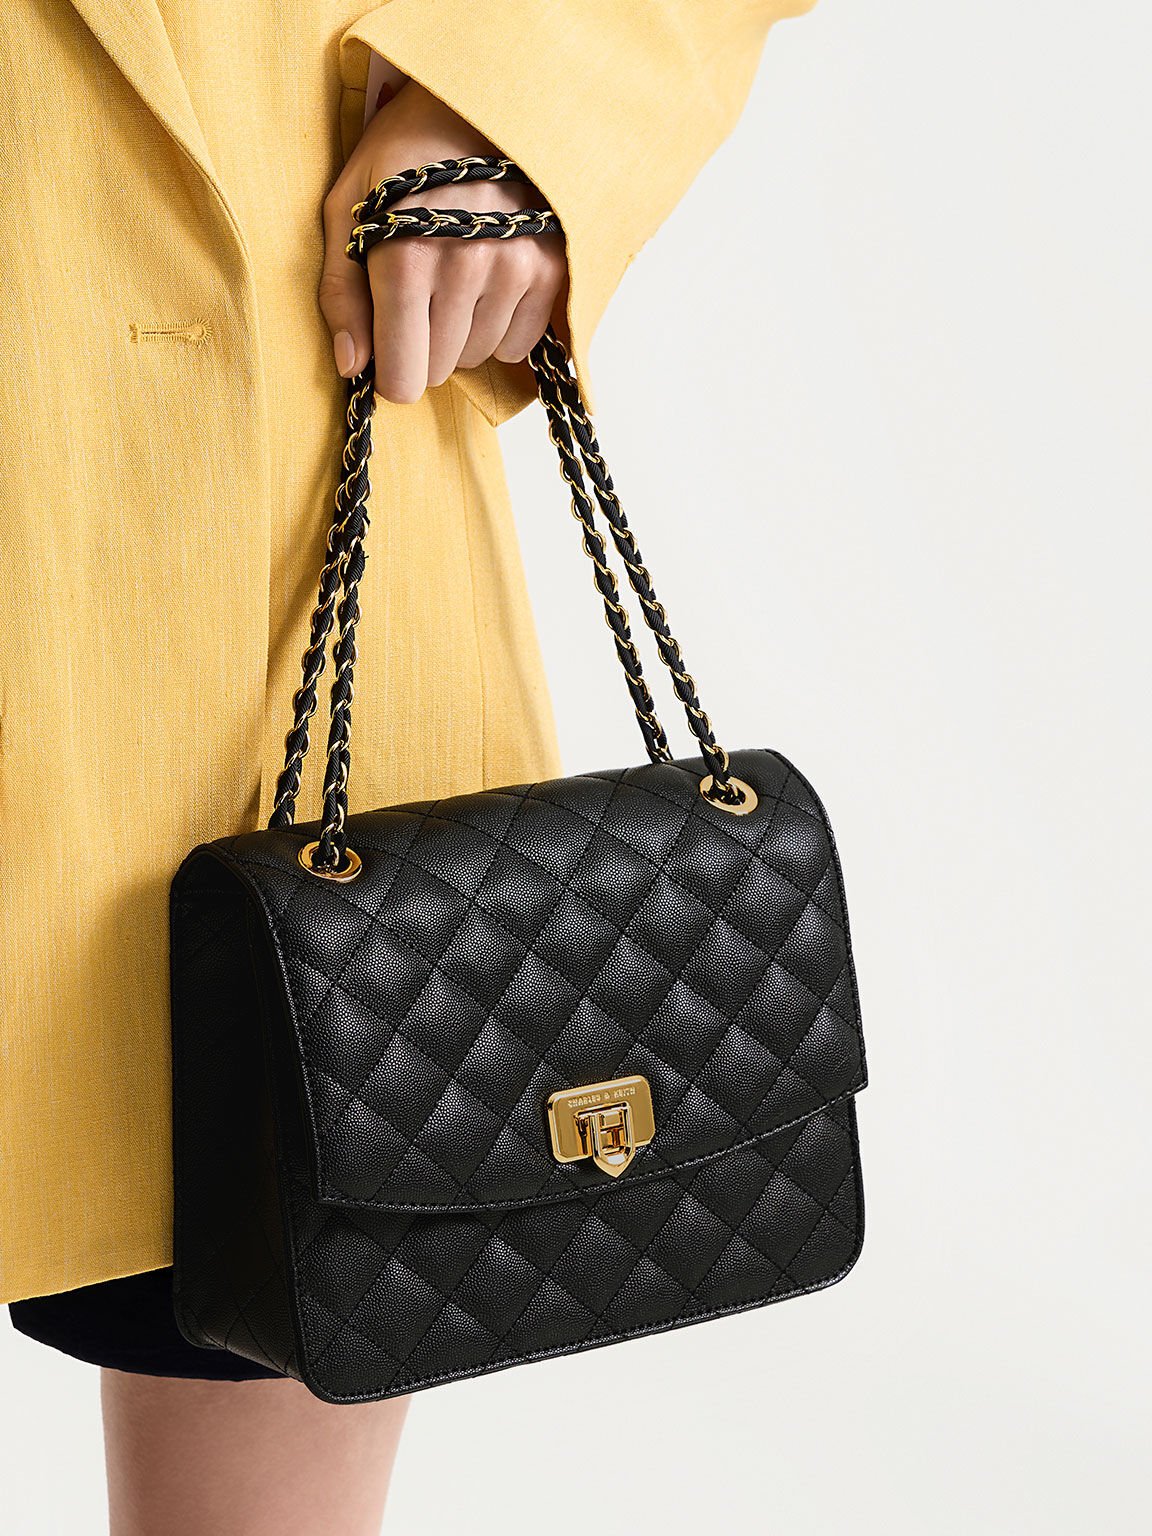 Black Cressida Quilted Chain Strap Bag - CHARLES & KEITH OM